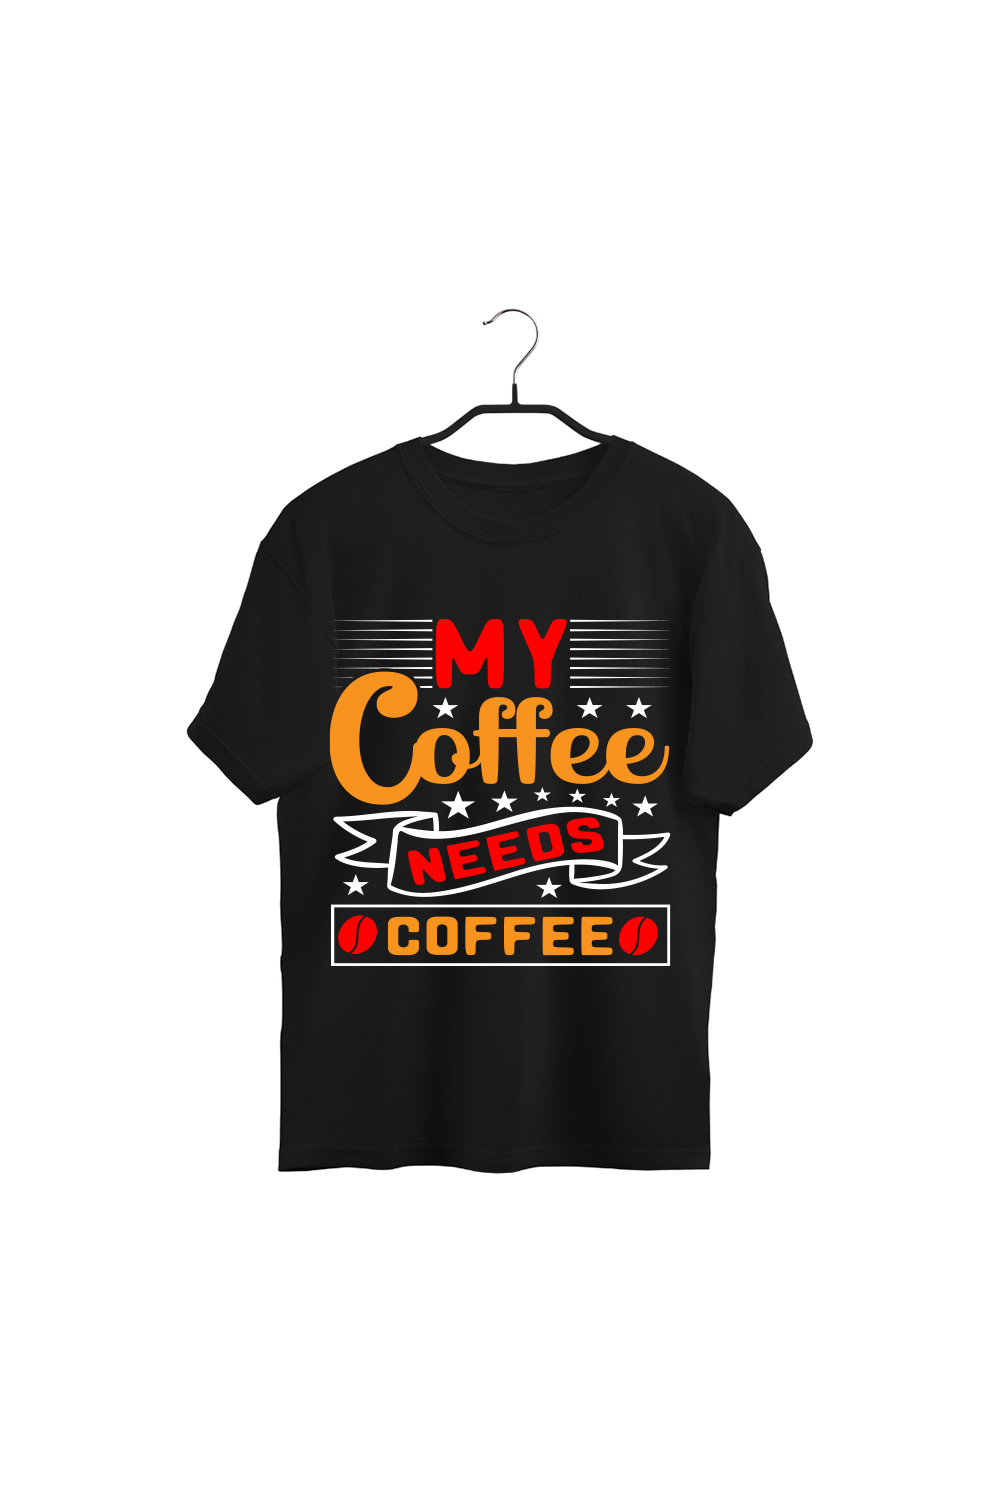 coffee t shirt design 2023 pinterest preview image.